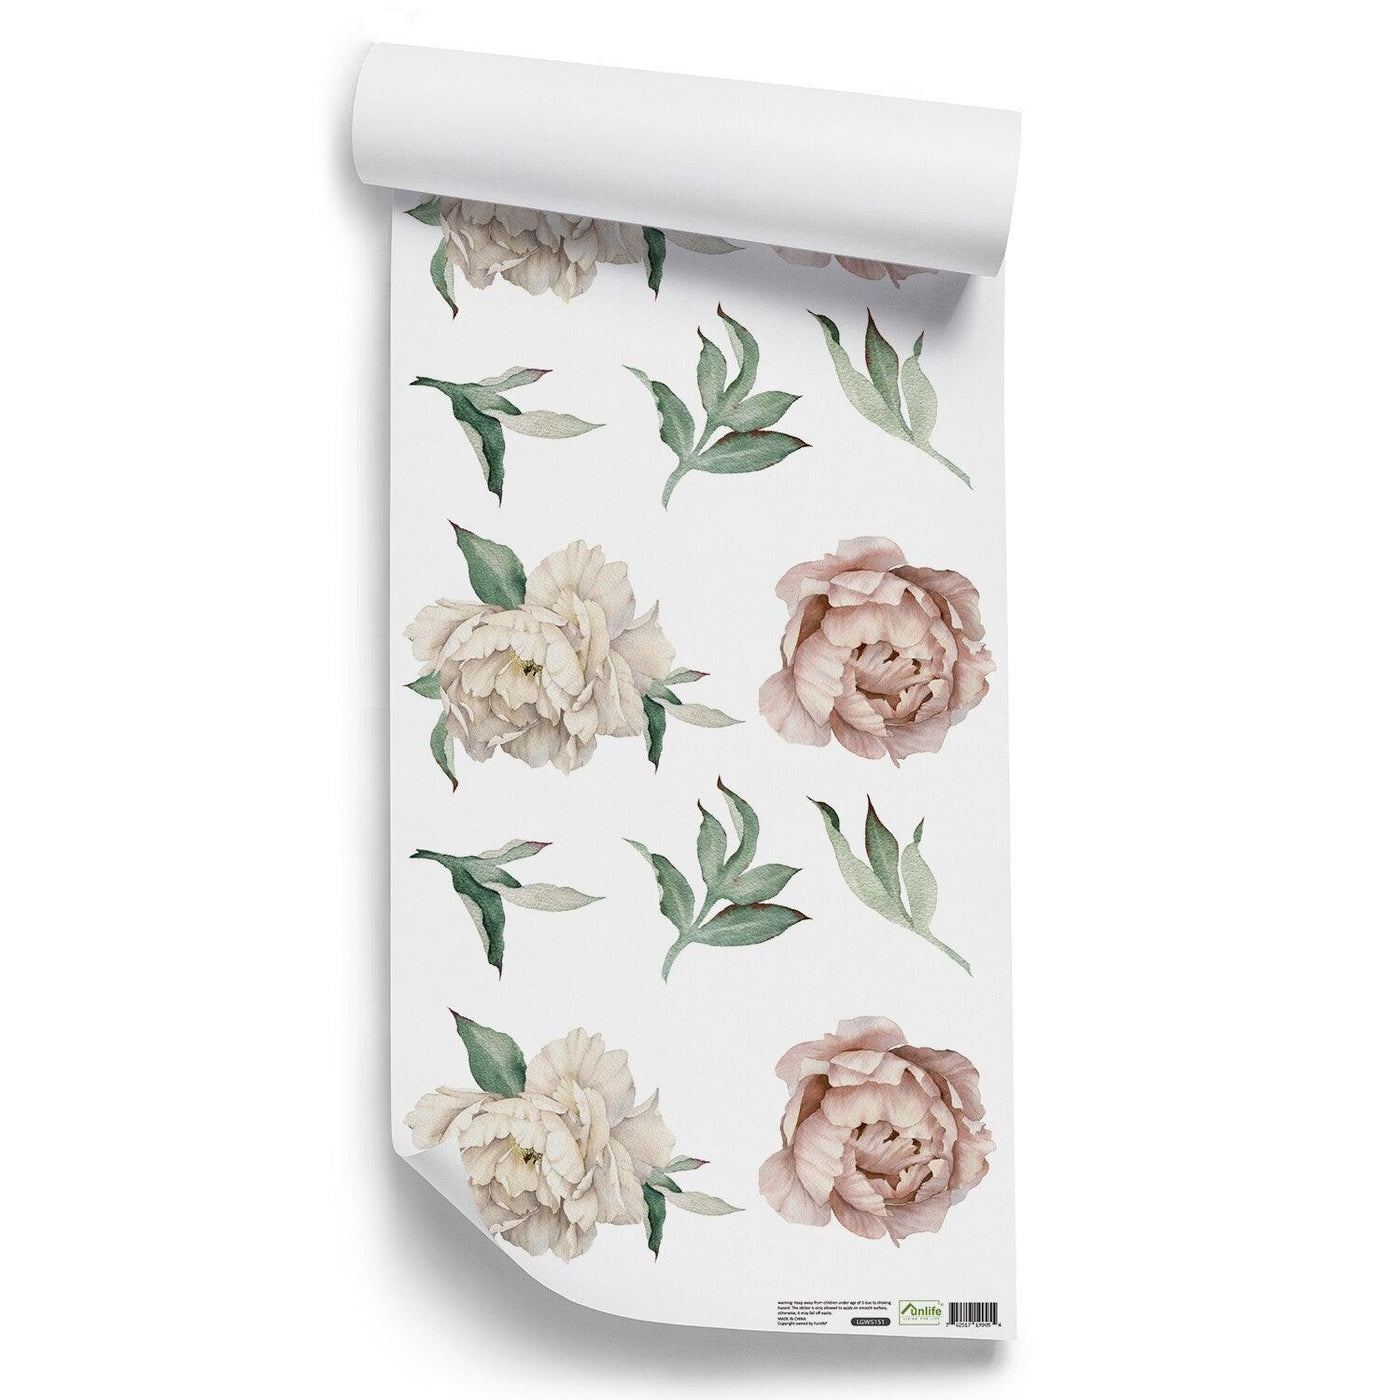 Peony Flowers Wall Decal Stickers - Parker and Olive